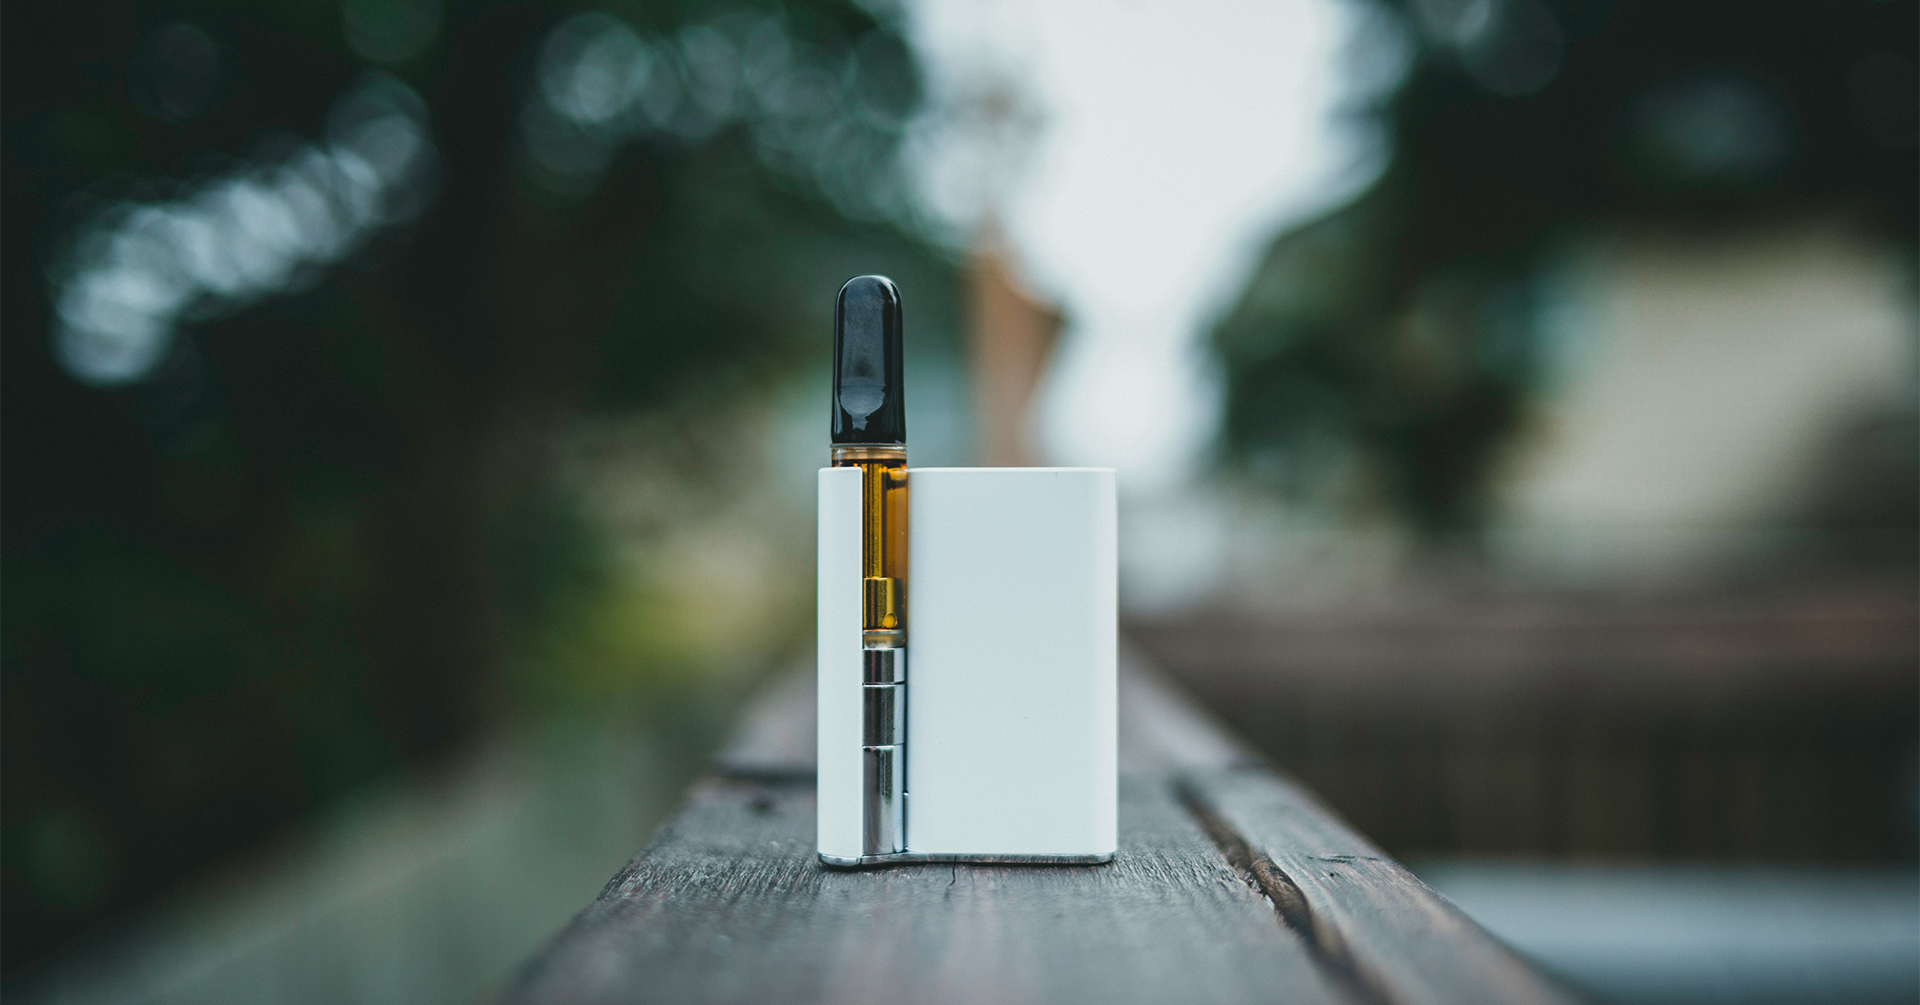 A vaping device is in focus in the center of a wood table outside with filtered sunlight through trees.